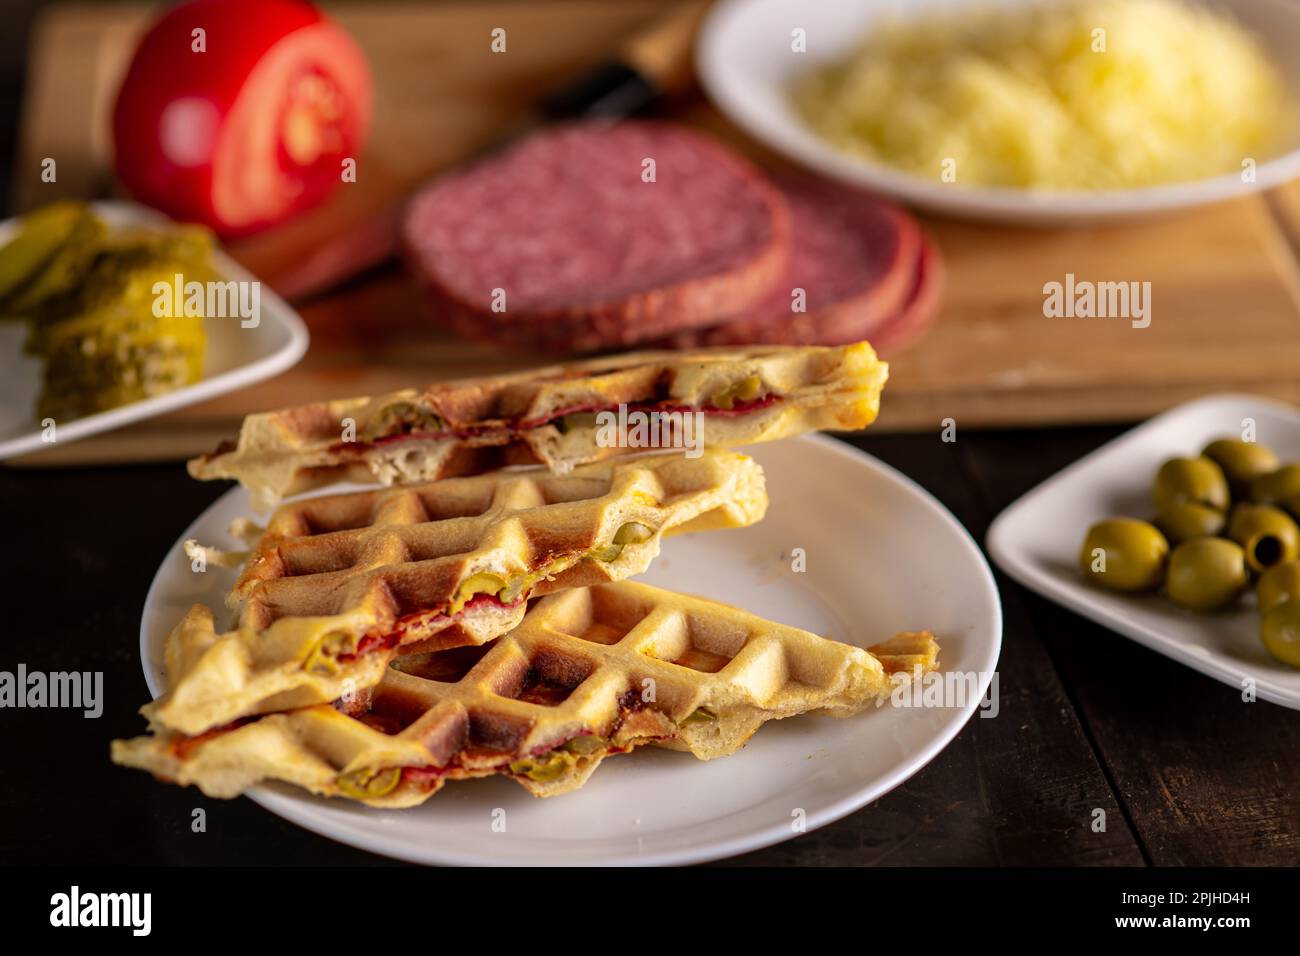 https://c8.alamy.com/comp/2PJHD4H/pizza-waffles-piffle-waffles-stuffed-with-sausage-cheese-tomatoes-on-a-plate-surrounded-by-cooking-ingredients-2PJHD4H.jpg